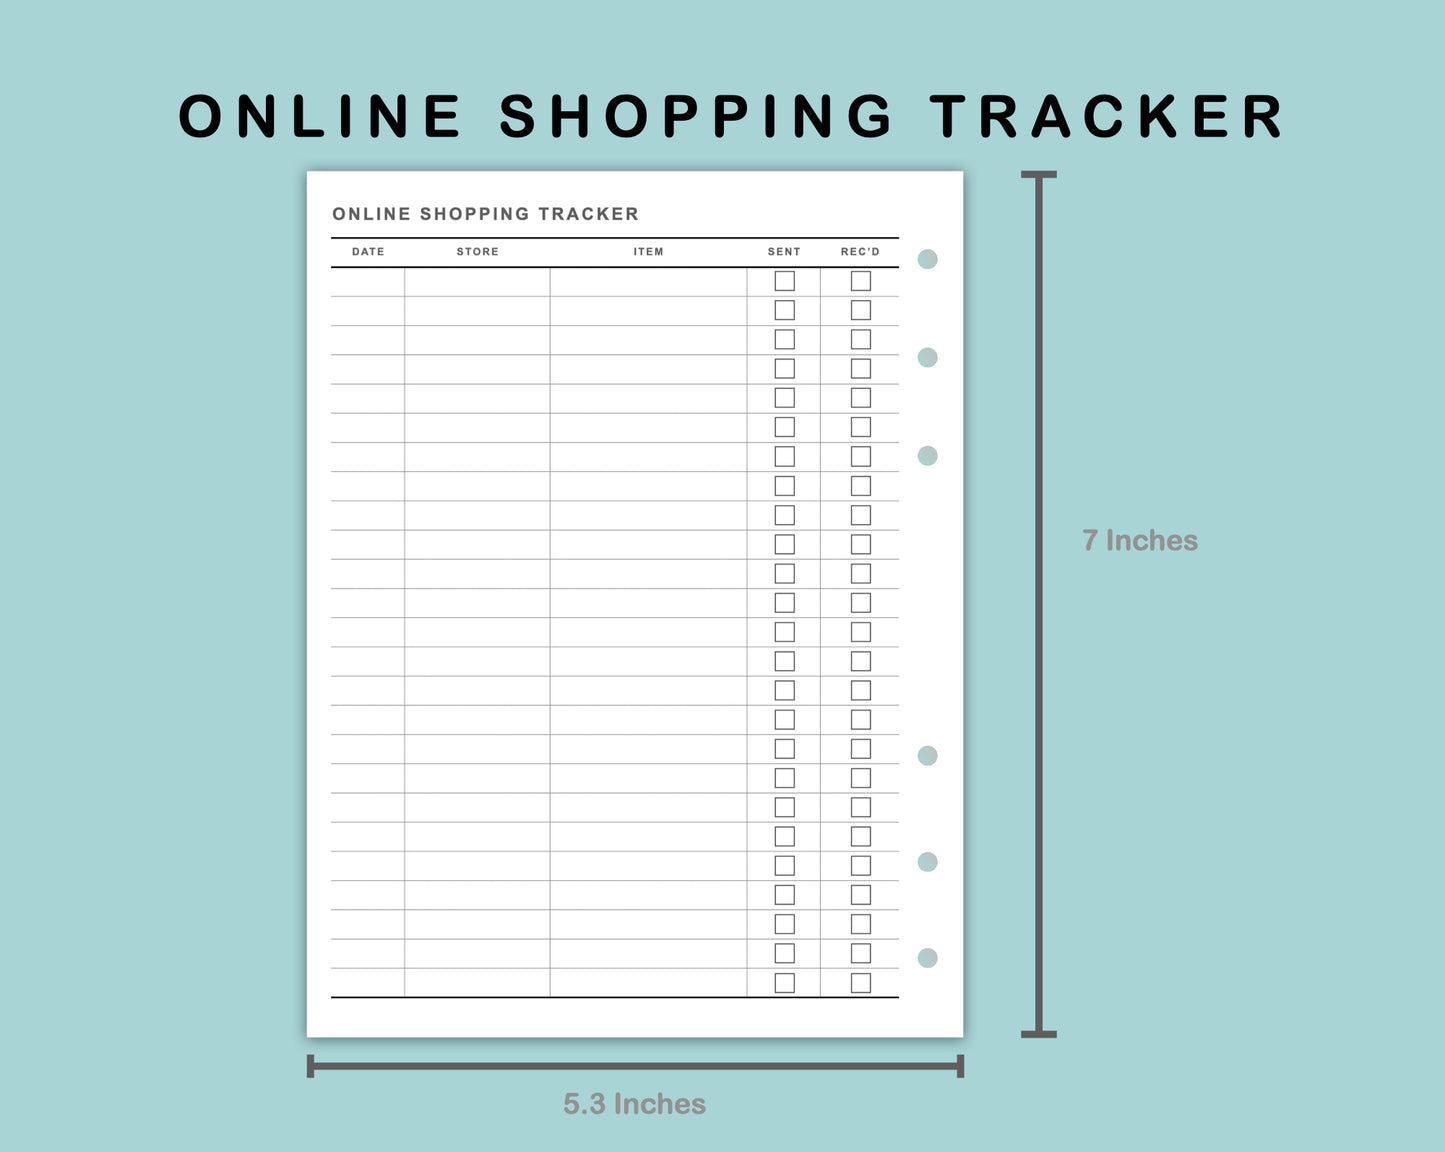 B6 Wide Inserts - Online Shopping Tracker